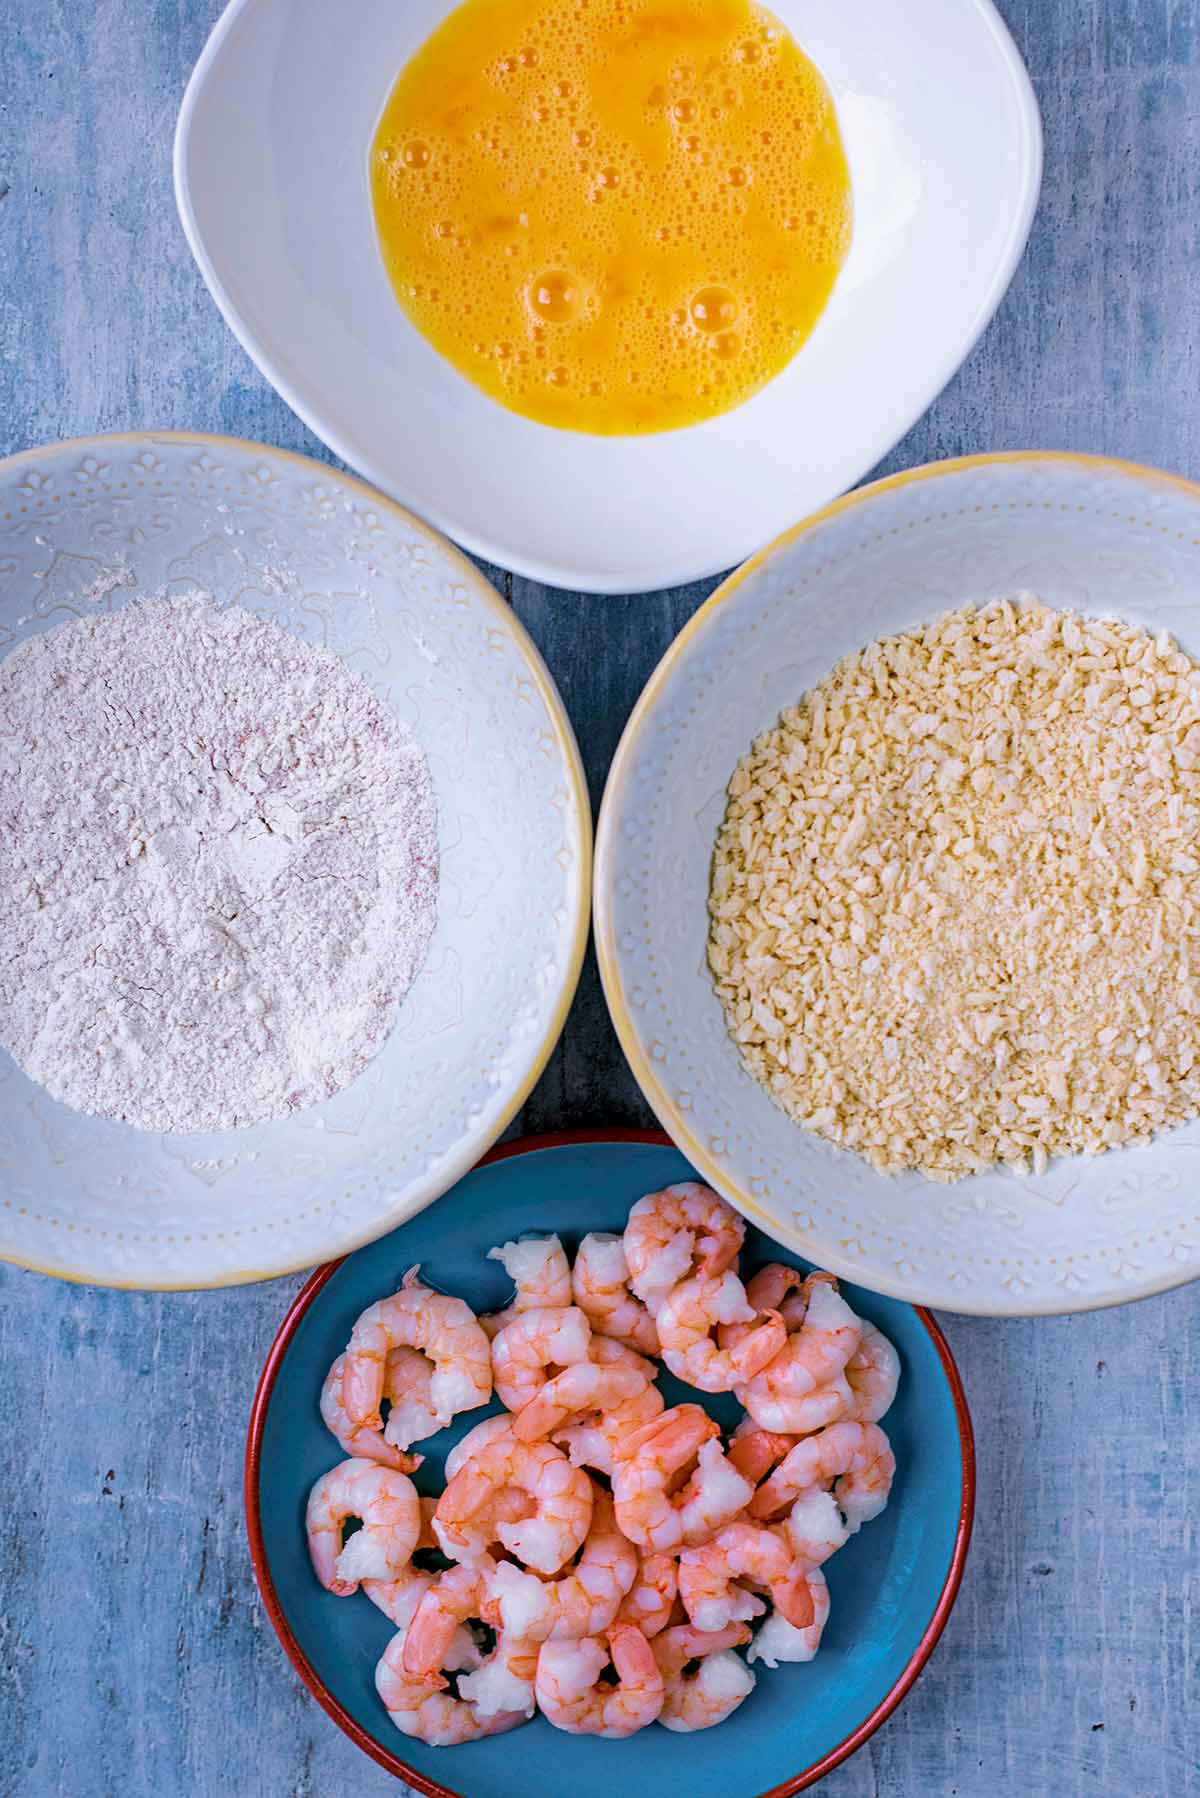 A plate of prawns, and bowls of flour, breadcrumbs and whisked egg.